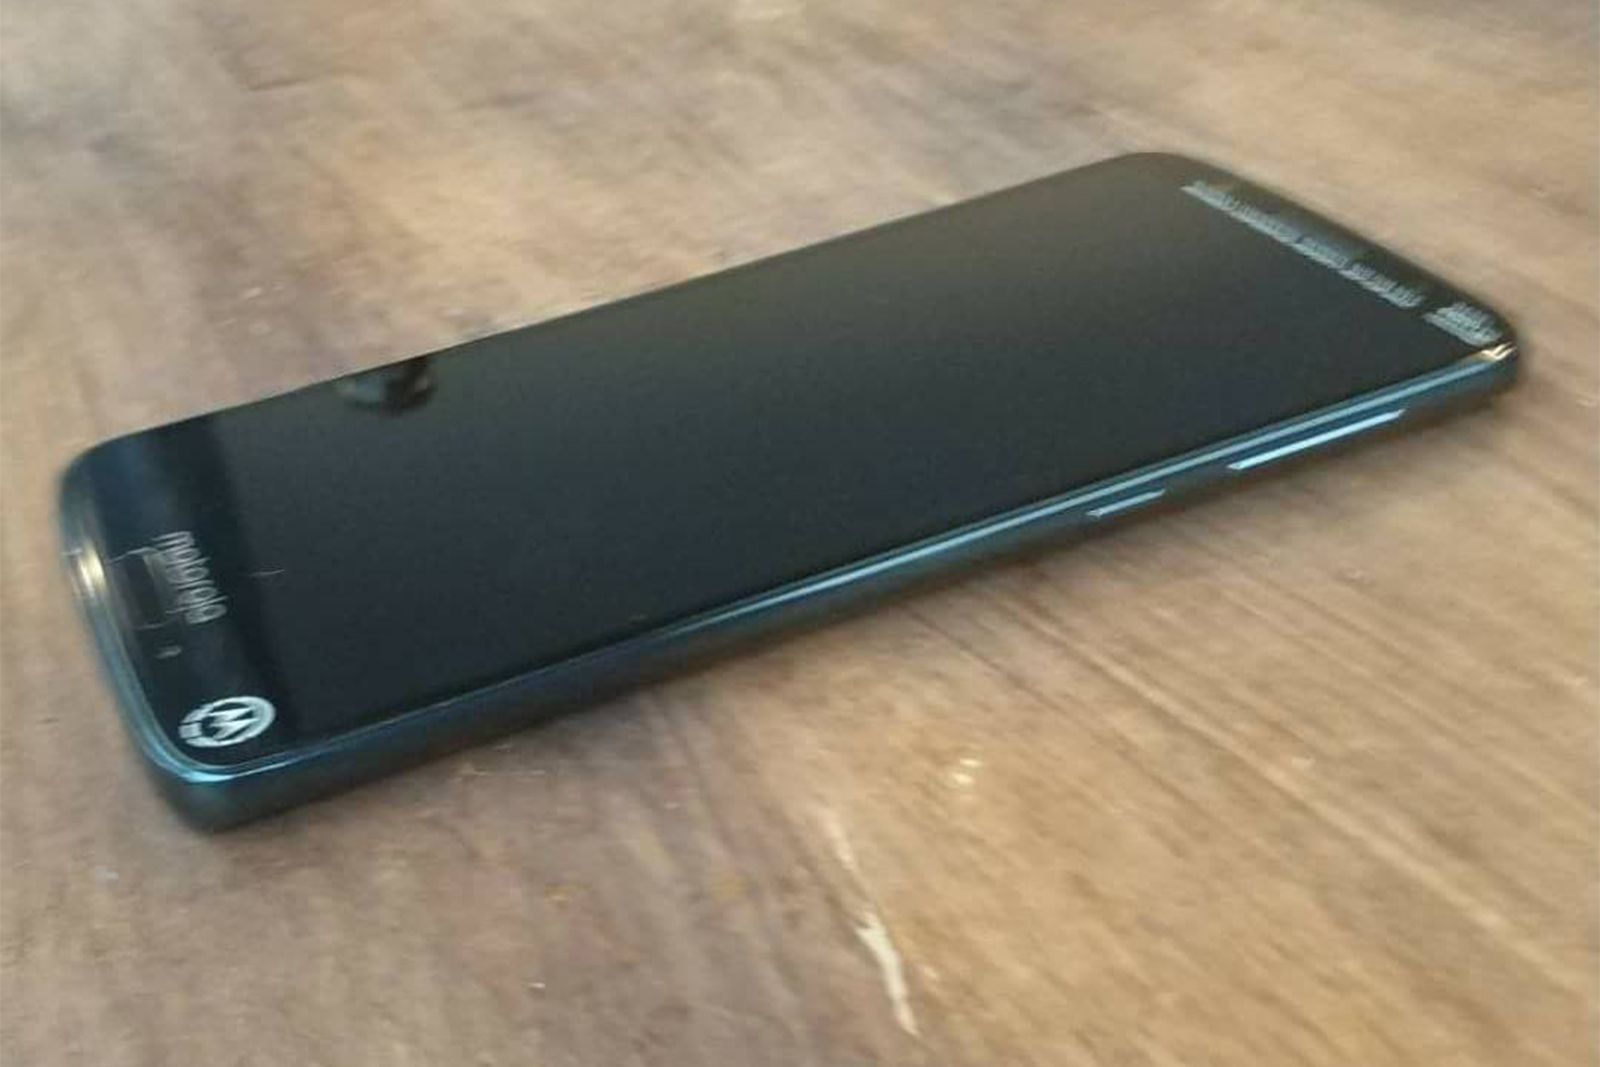 Motorola Moto G6 Plus spotted in the wild 189 display confirmed image 1